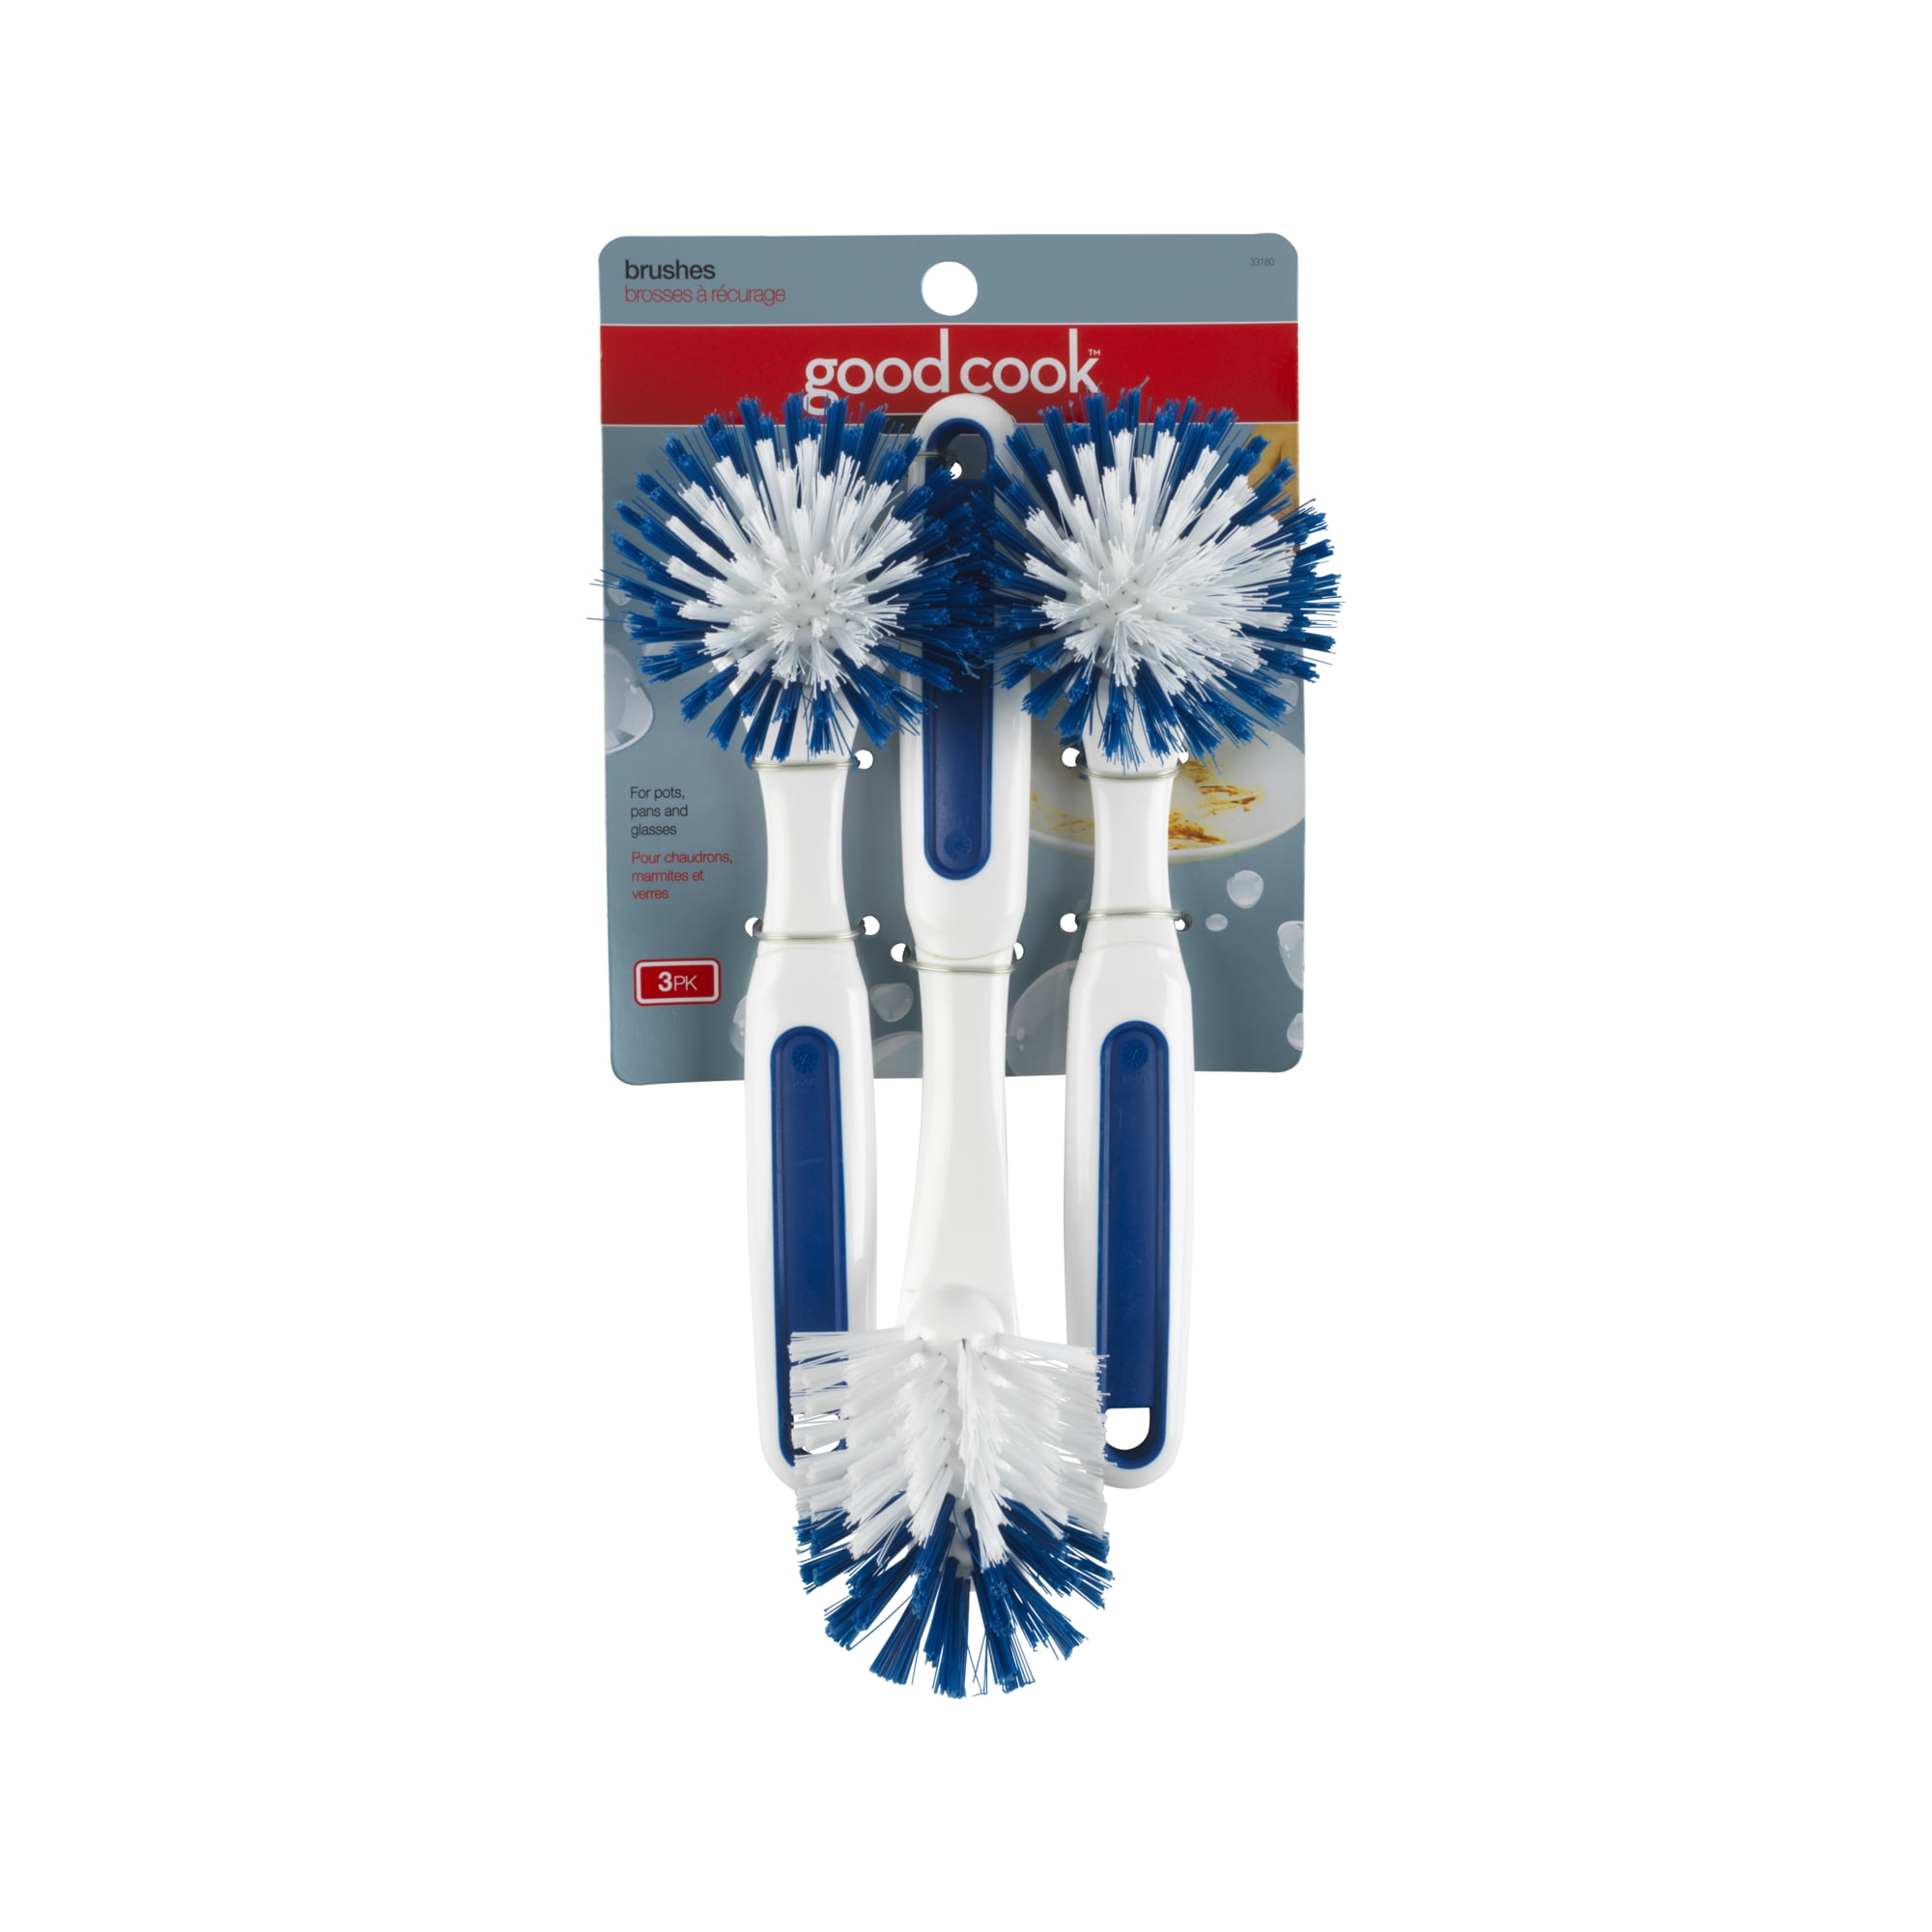 Good Cook™ Sink Brushes 3 pk Carded Pack $10.87 FREE SHIPPING 